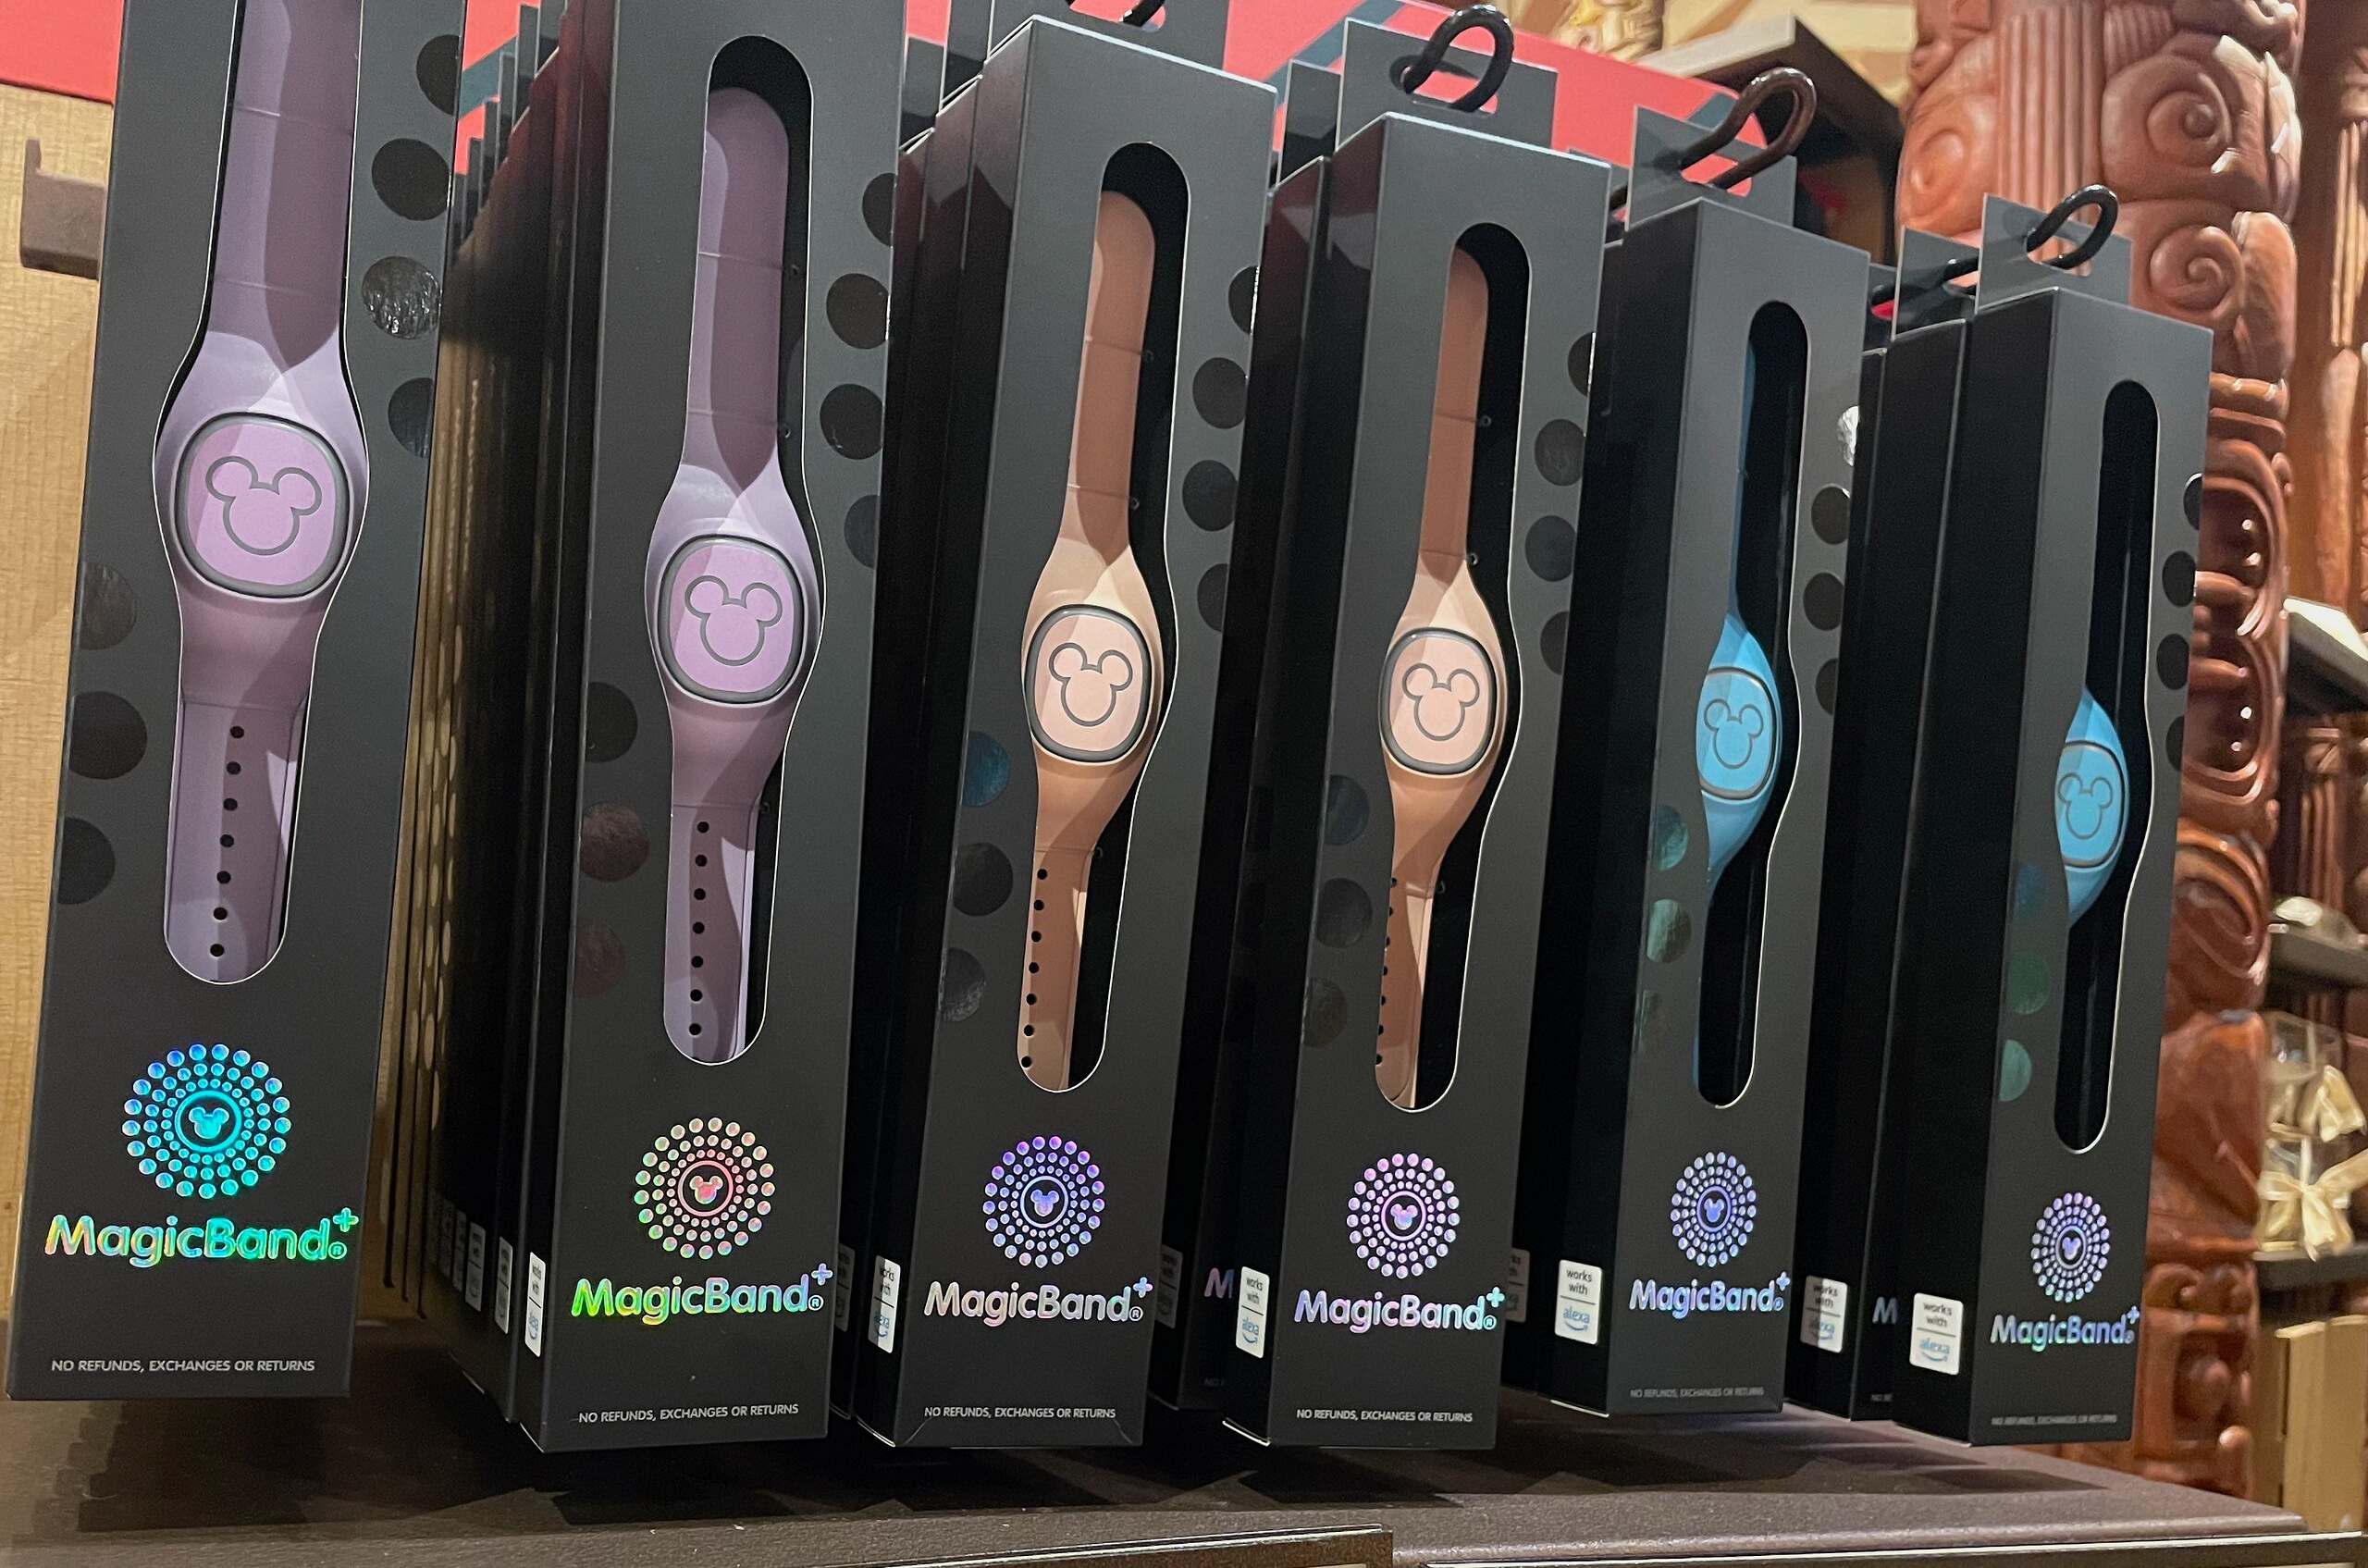 NEW! MAGICBAND & MAGICBAND+ Works at both DLR & WDW